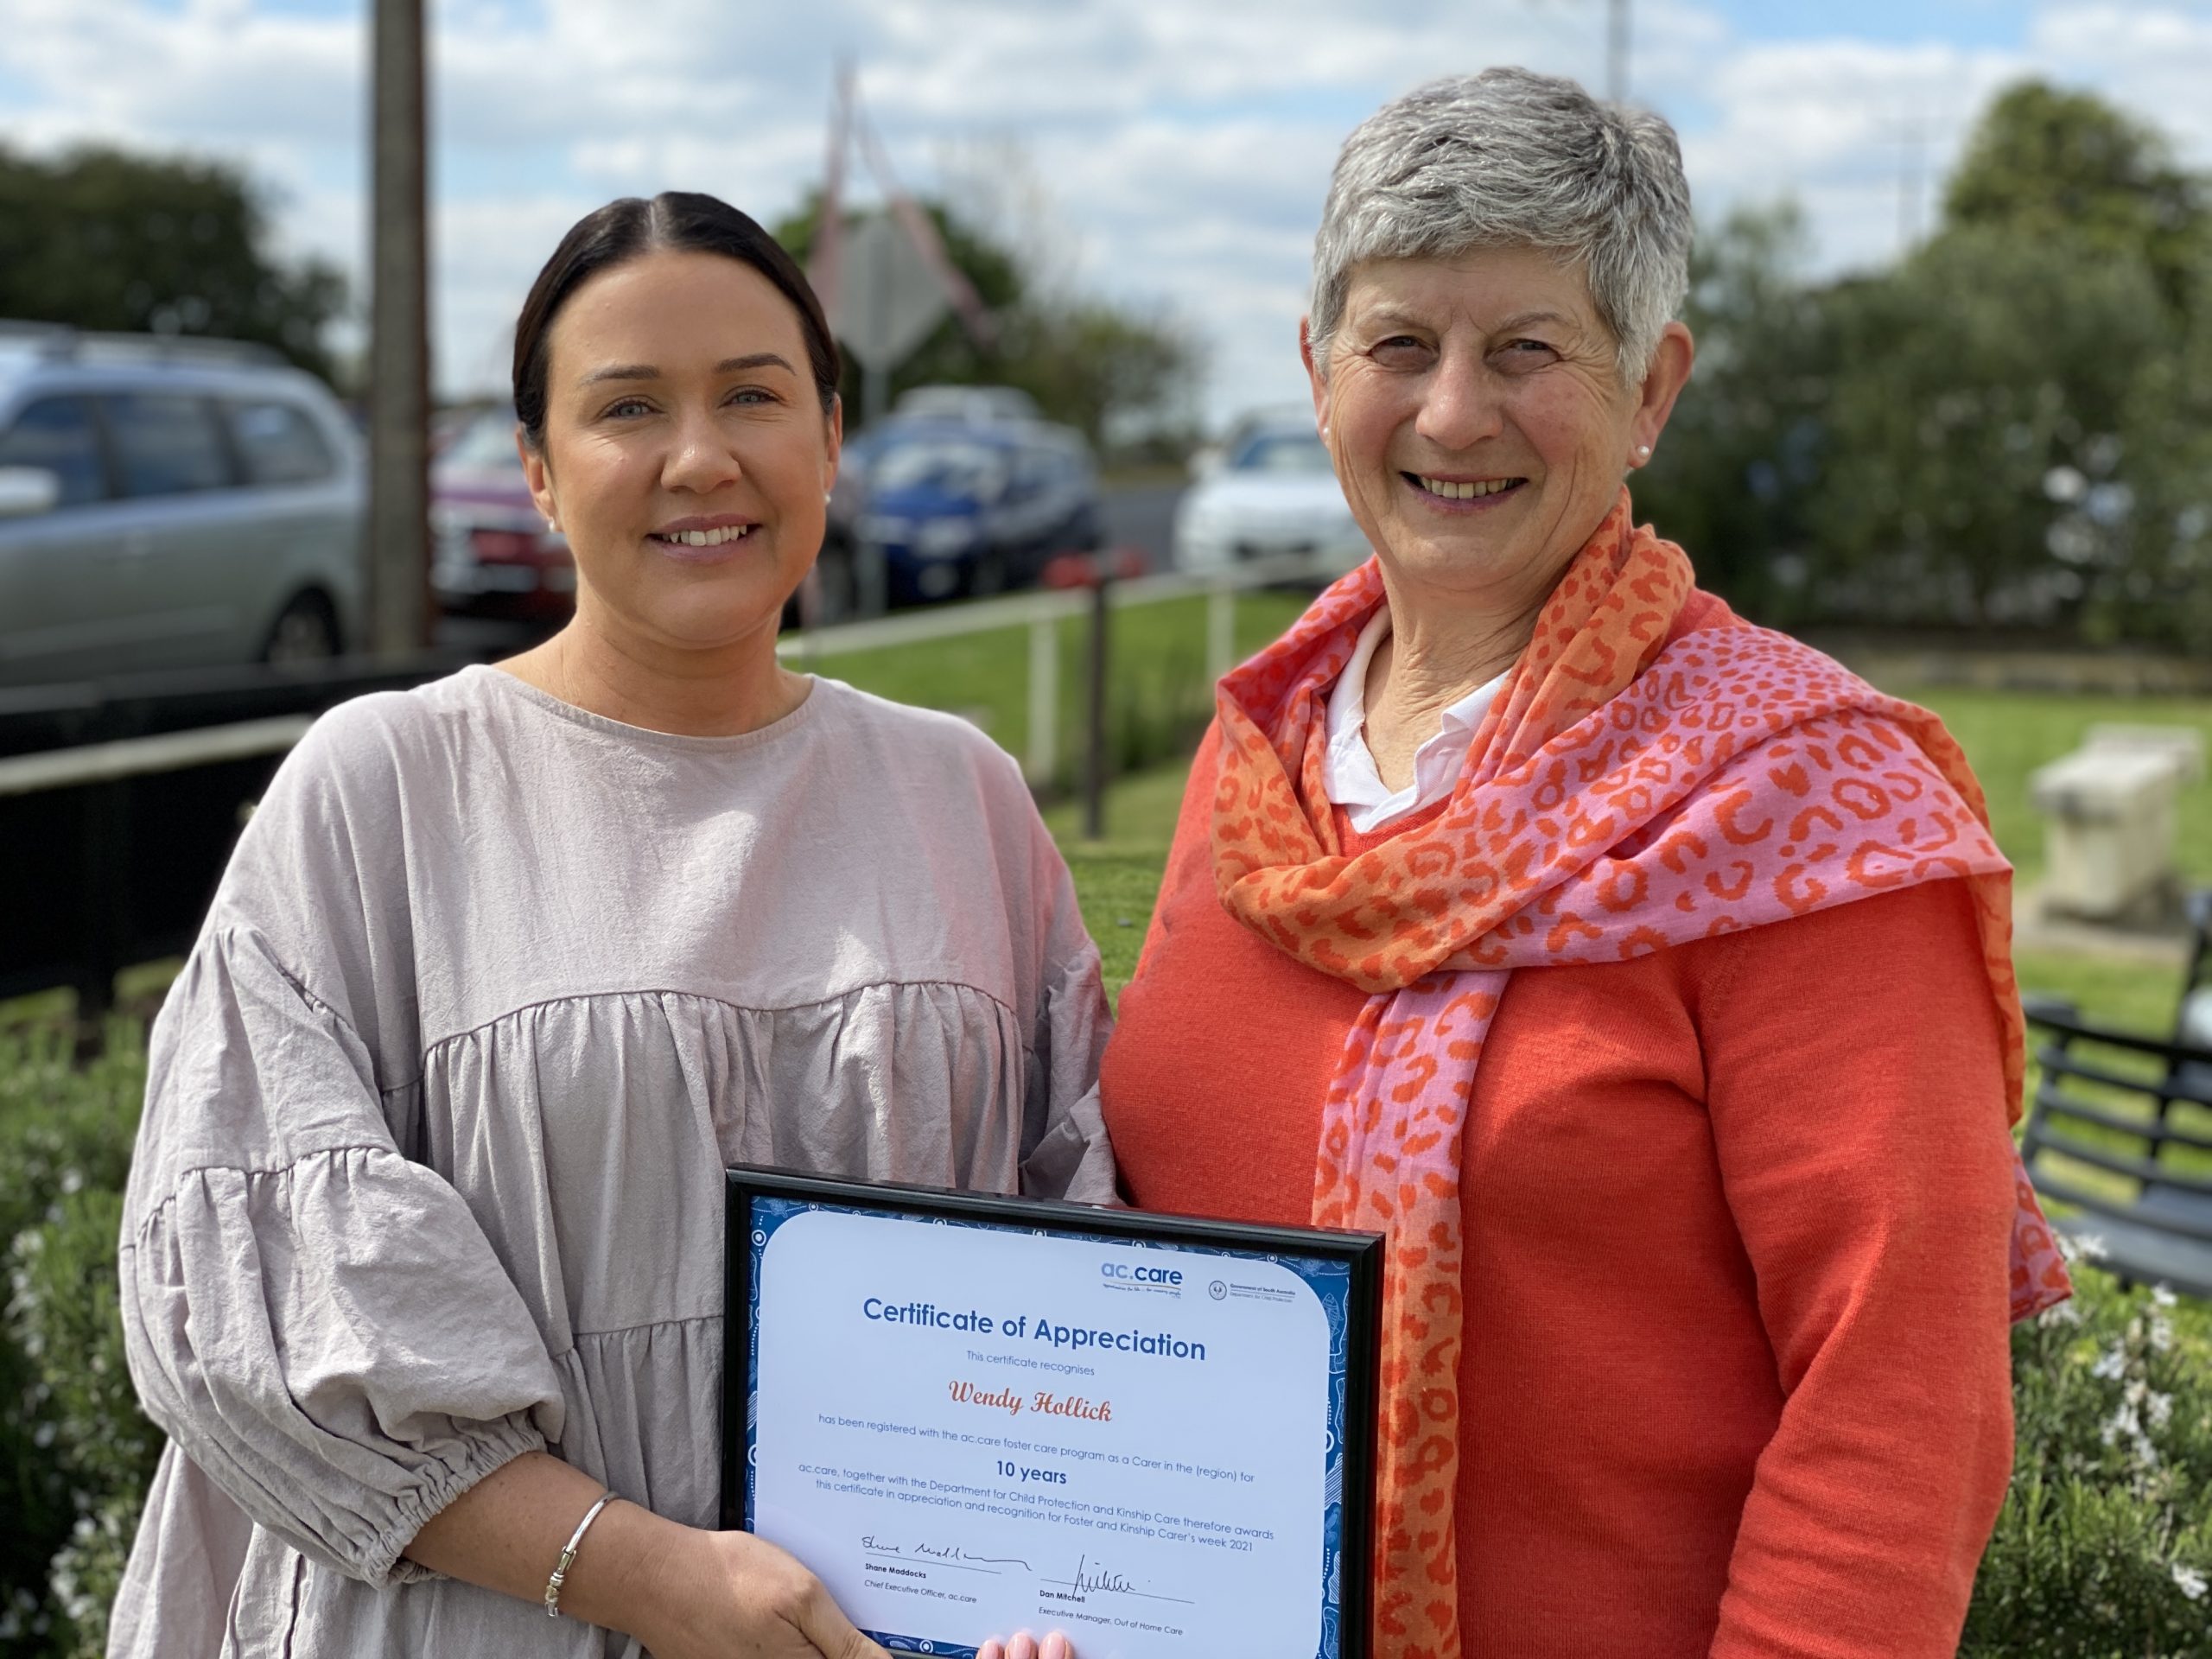 DECADE OF DEVOTION: Penola’s Wendy Hollick continues to welcome children into her home for short stays as a respite foster carer. Her 10 years of service was celebrated by placement support worker Emily Wastell during SA Foster and Kinship Carers Week.